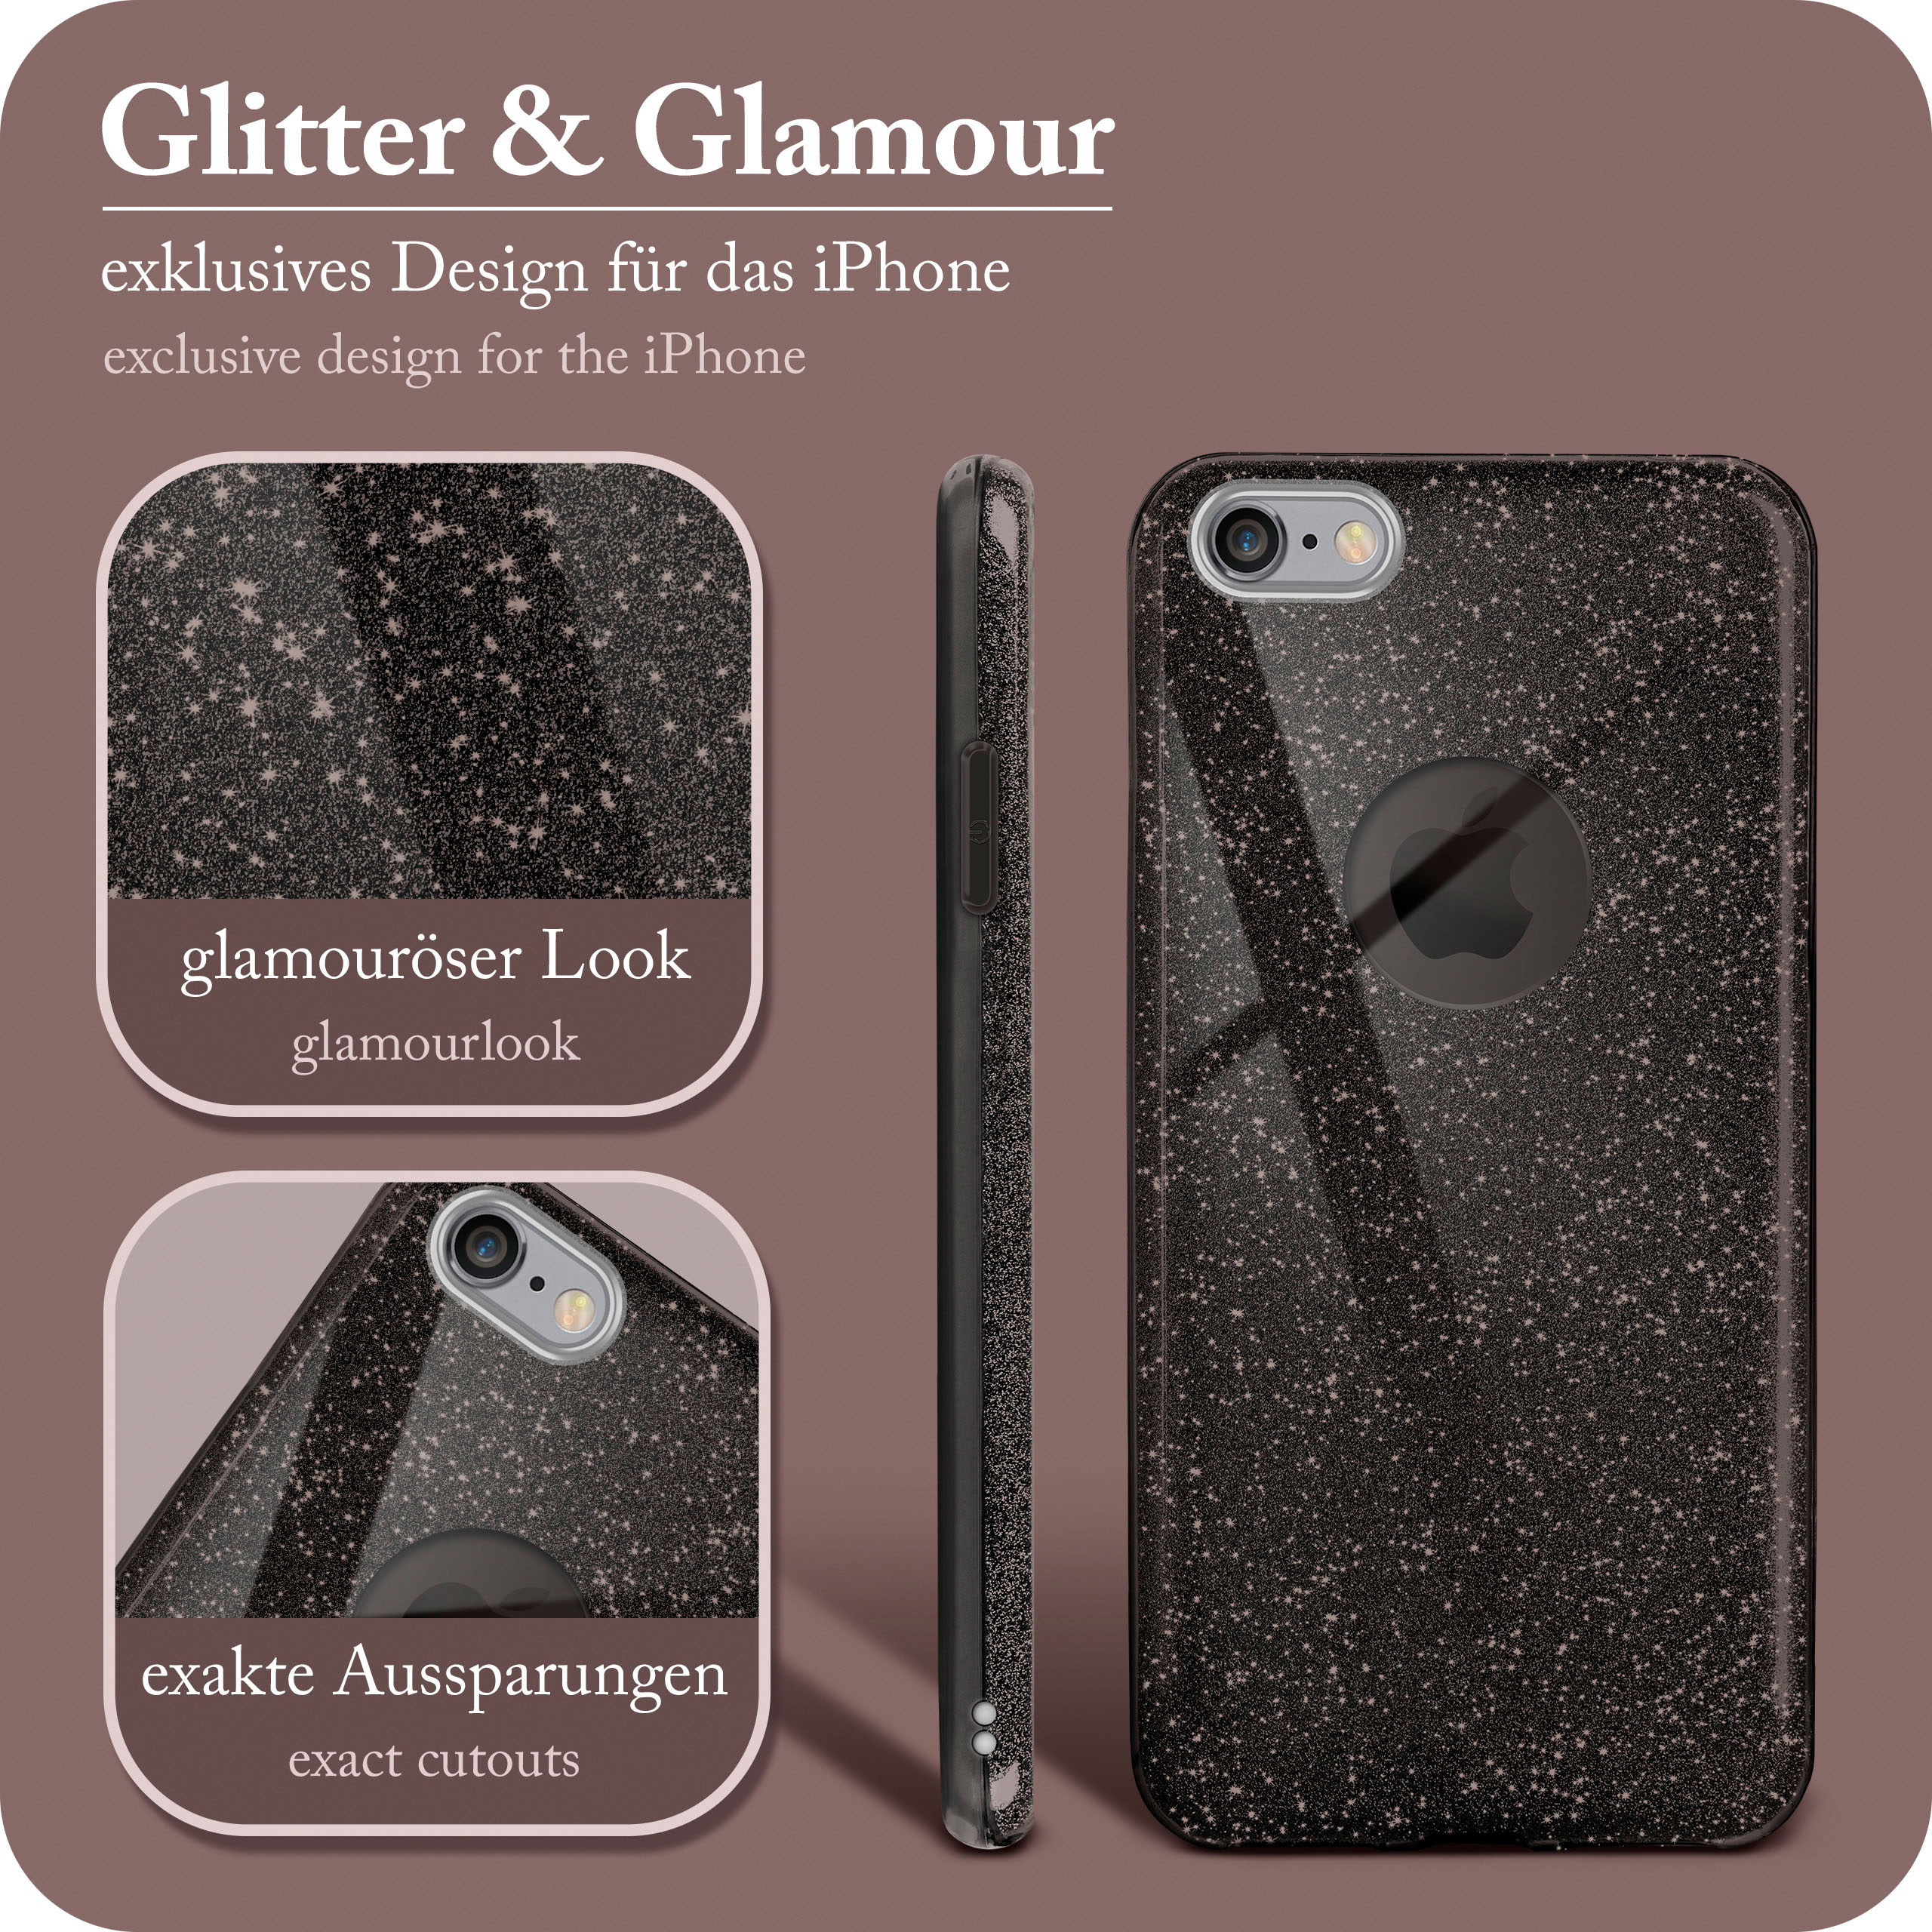 ONEFLOW iPhone Case, - Apple, Glitter / Black 6s 6, iPhone Backcover, Glamour